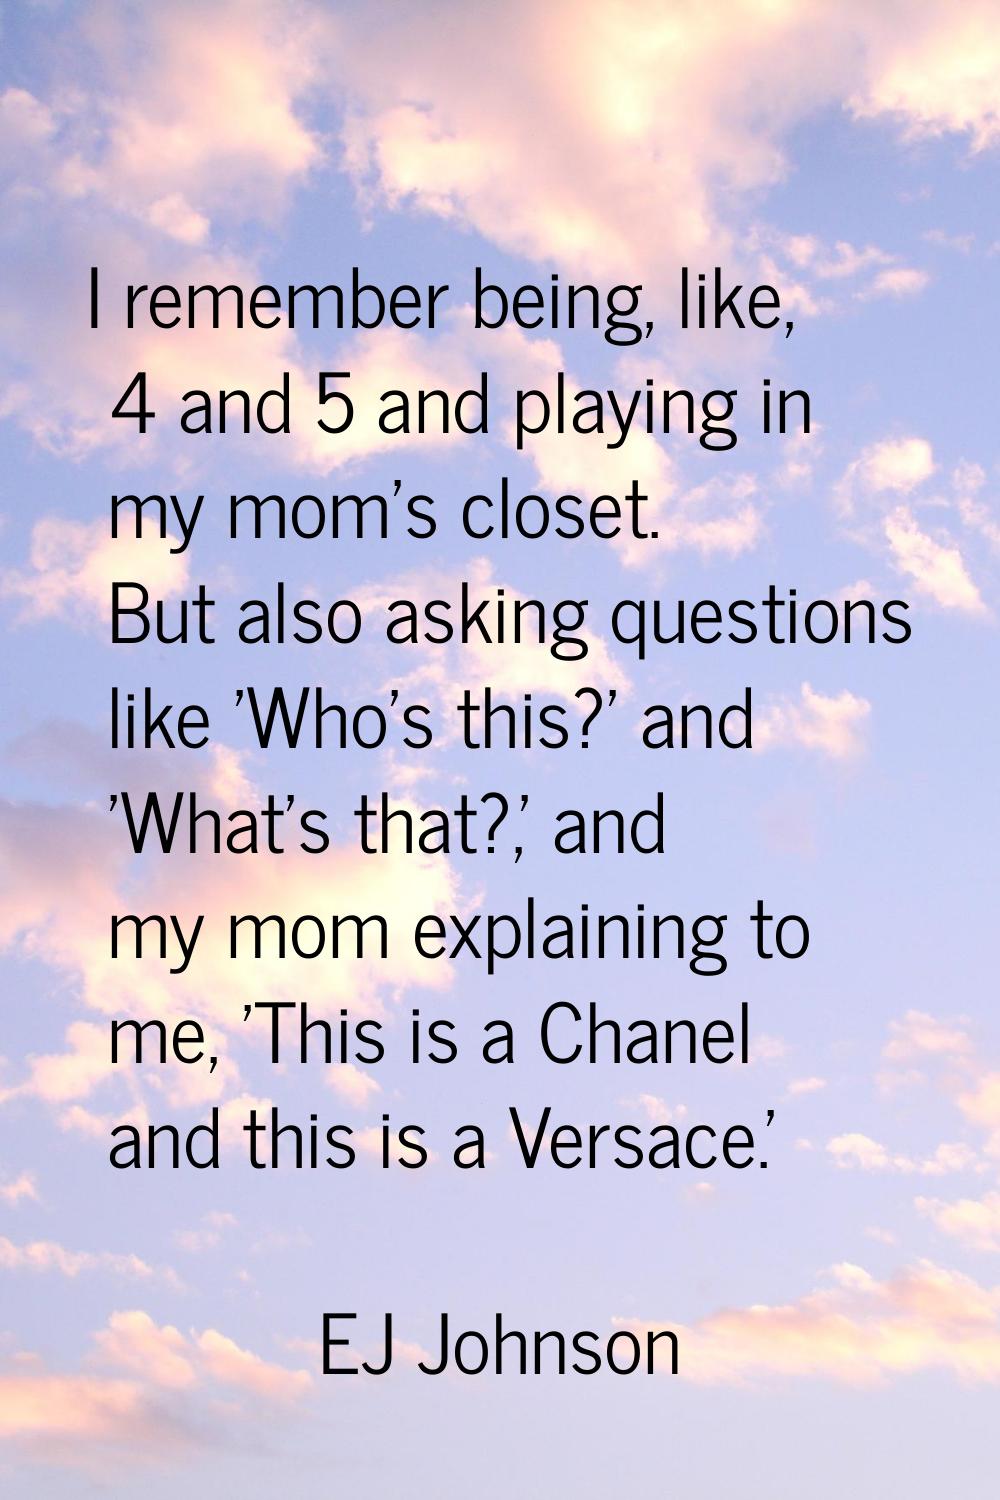 I remember being, like, 4 and 5 and playing in my mom's closet. But also asking questions like 'Who